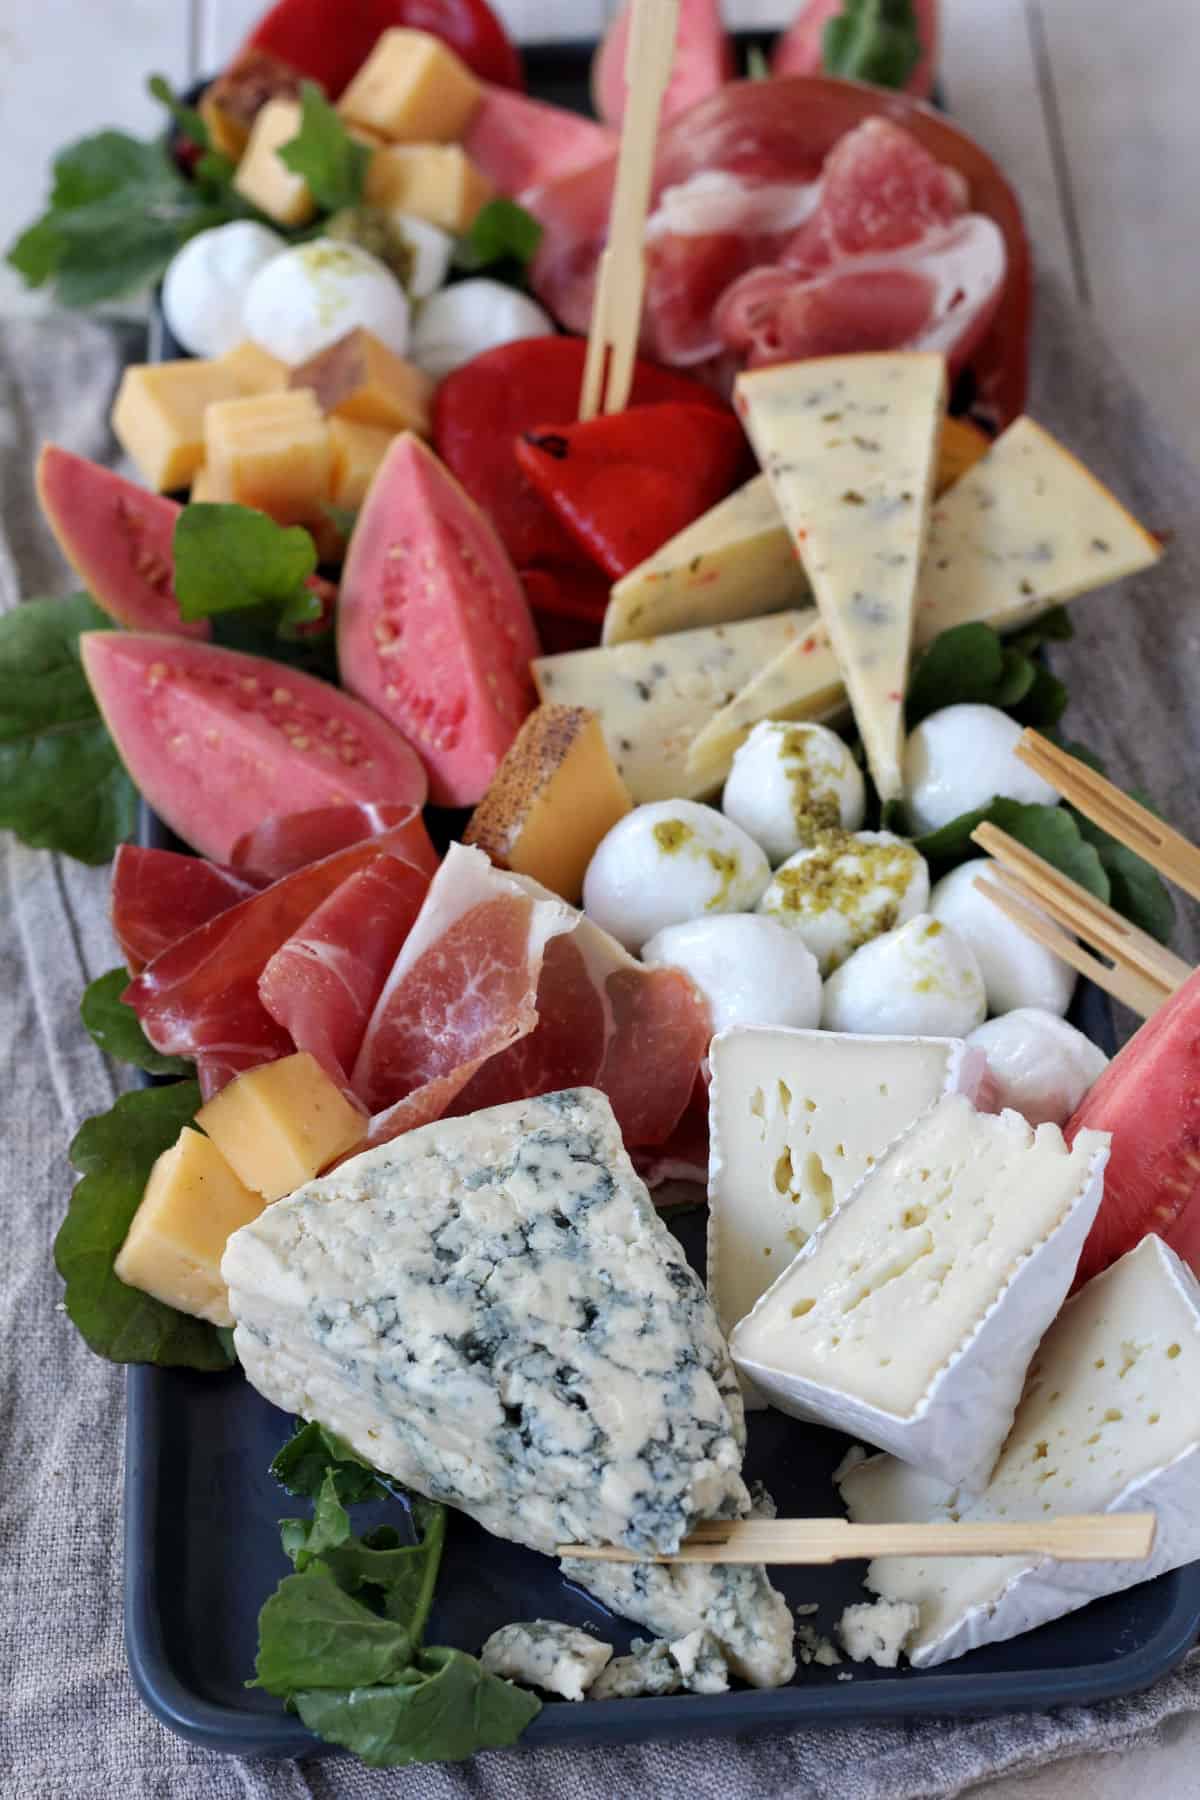 Charcuterie board of cheese, meats, and fruit.